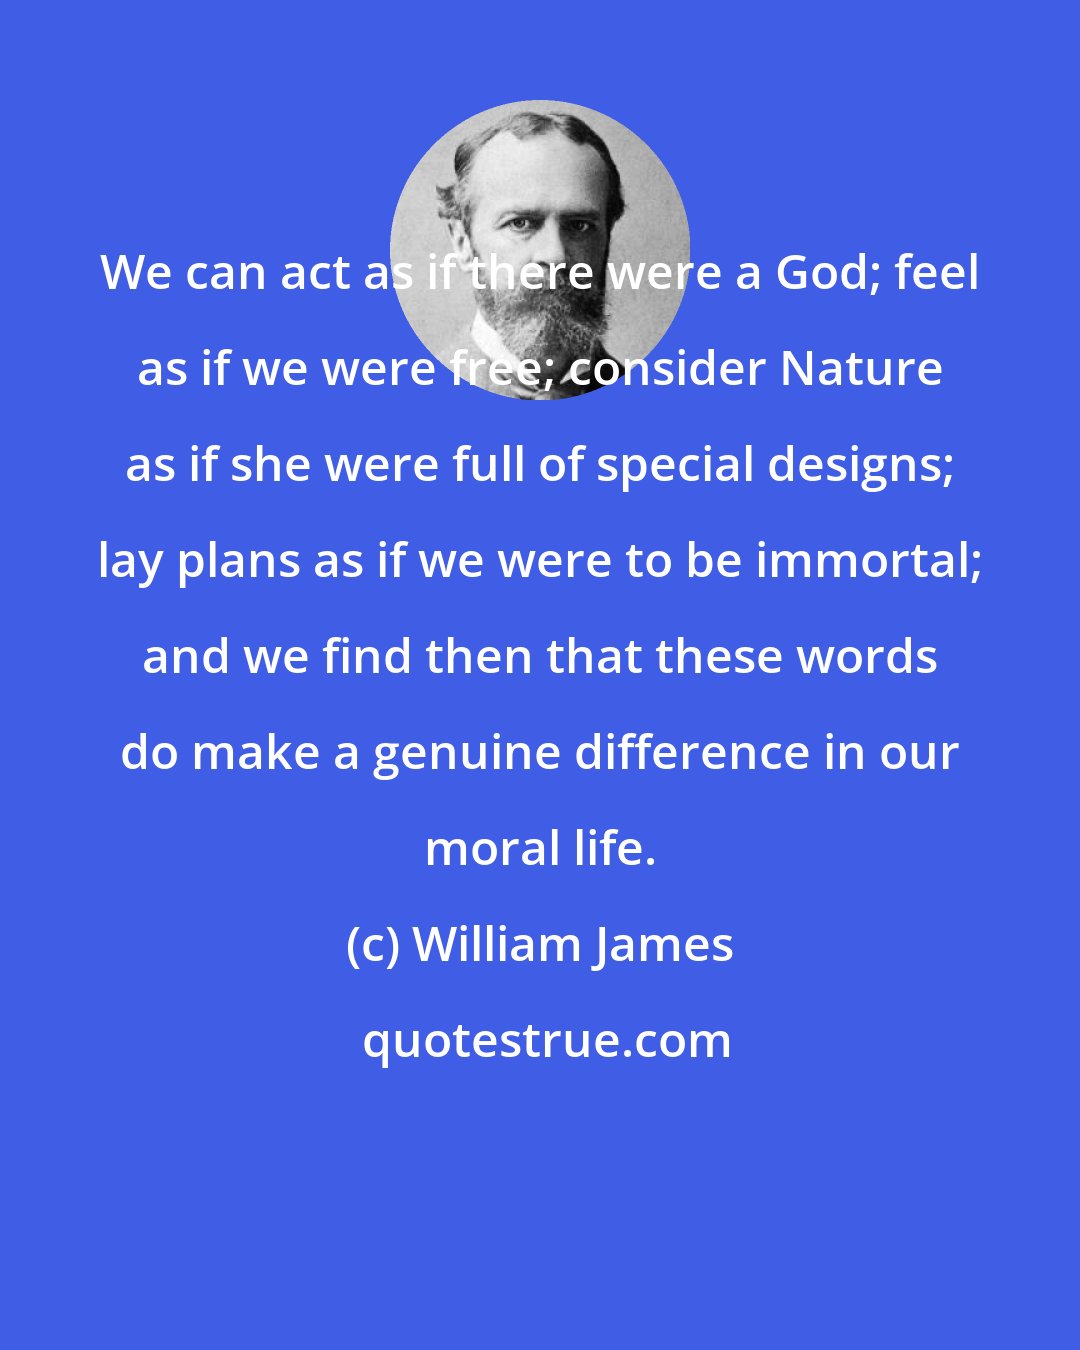 William James: We can act as if there were a God; feel as if we were free; consider Nature as if she were full of special designs; lay plans as if we were to be immortal; and we find then that these words do make a genuine difference in our moral life.